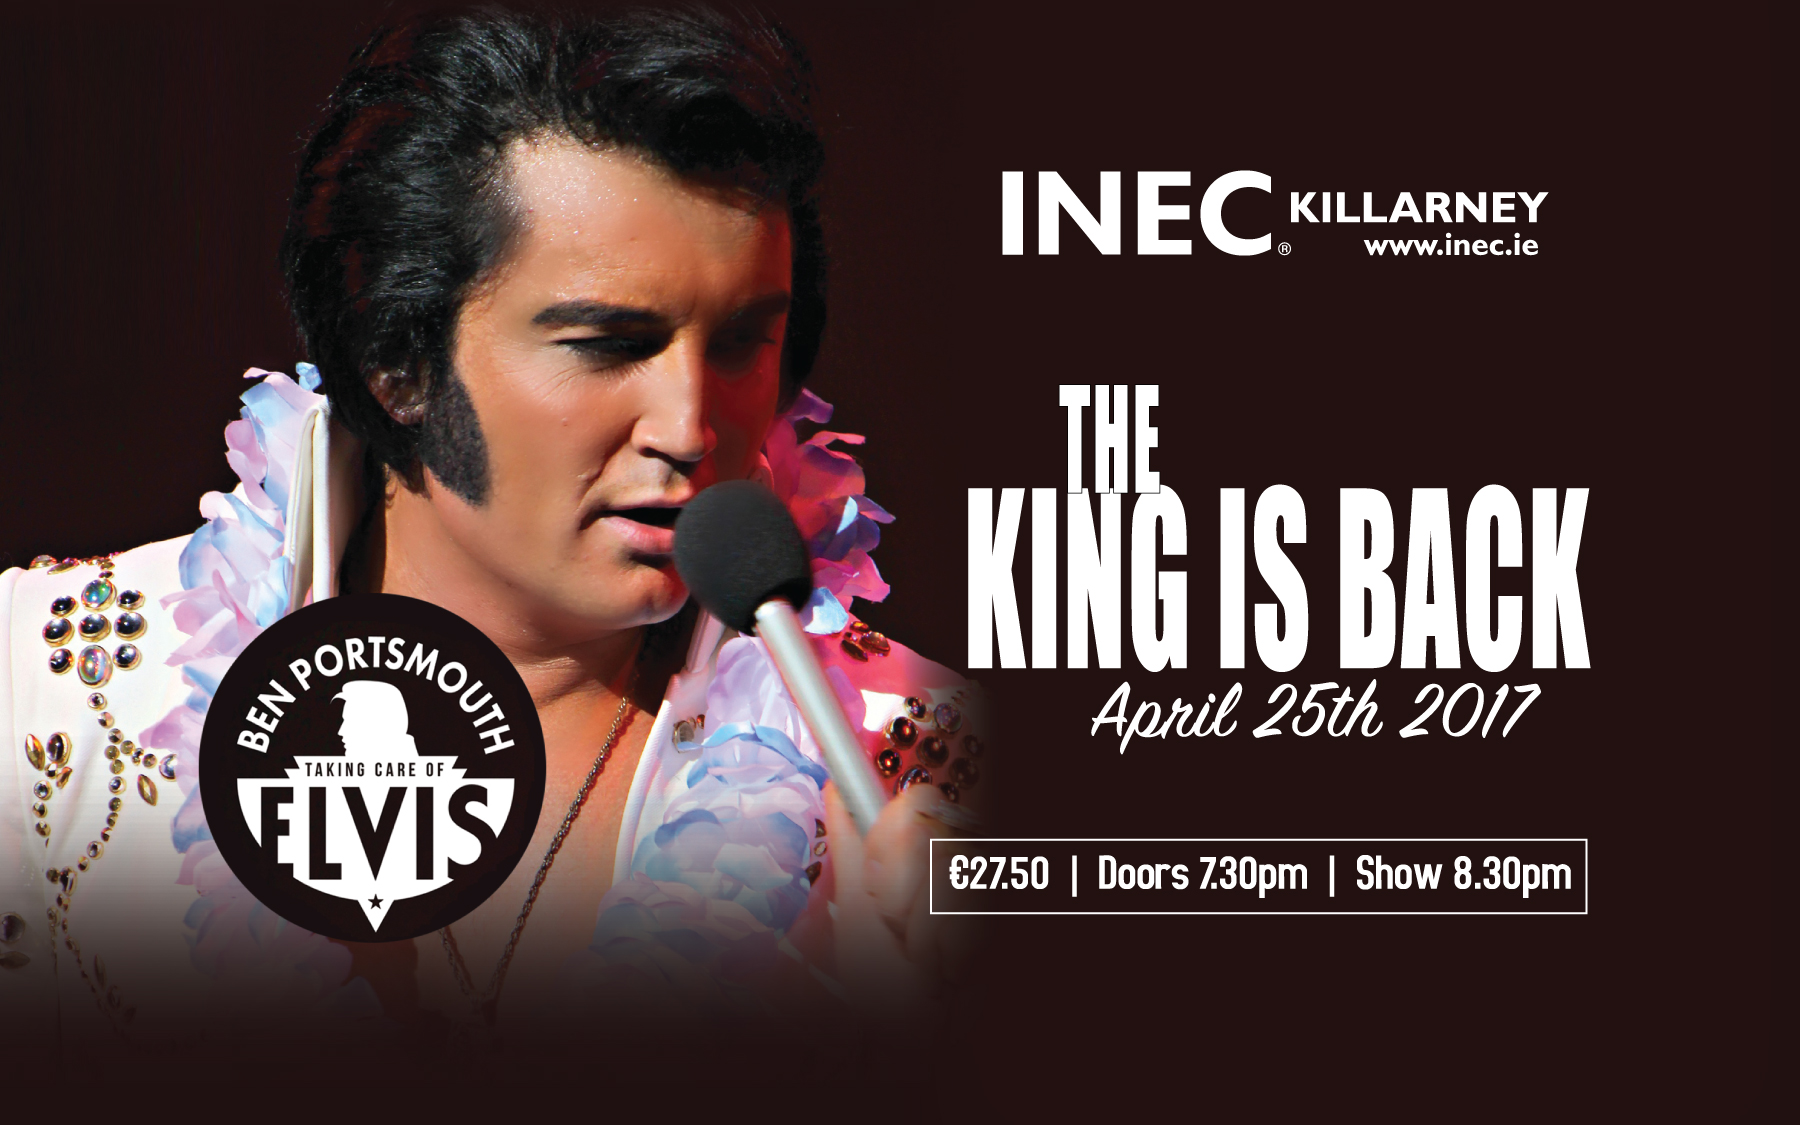 Ben Portsmouth as Elvis comes to the INEC Killarney April 25th